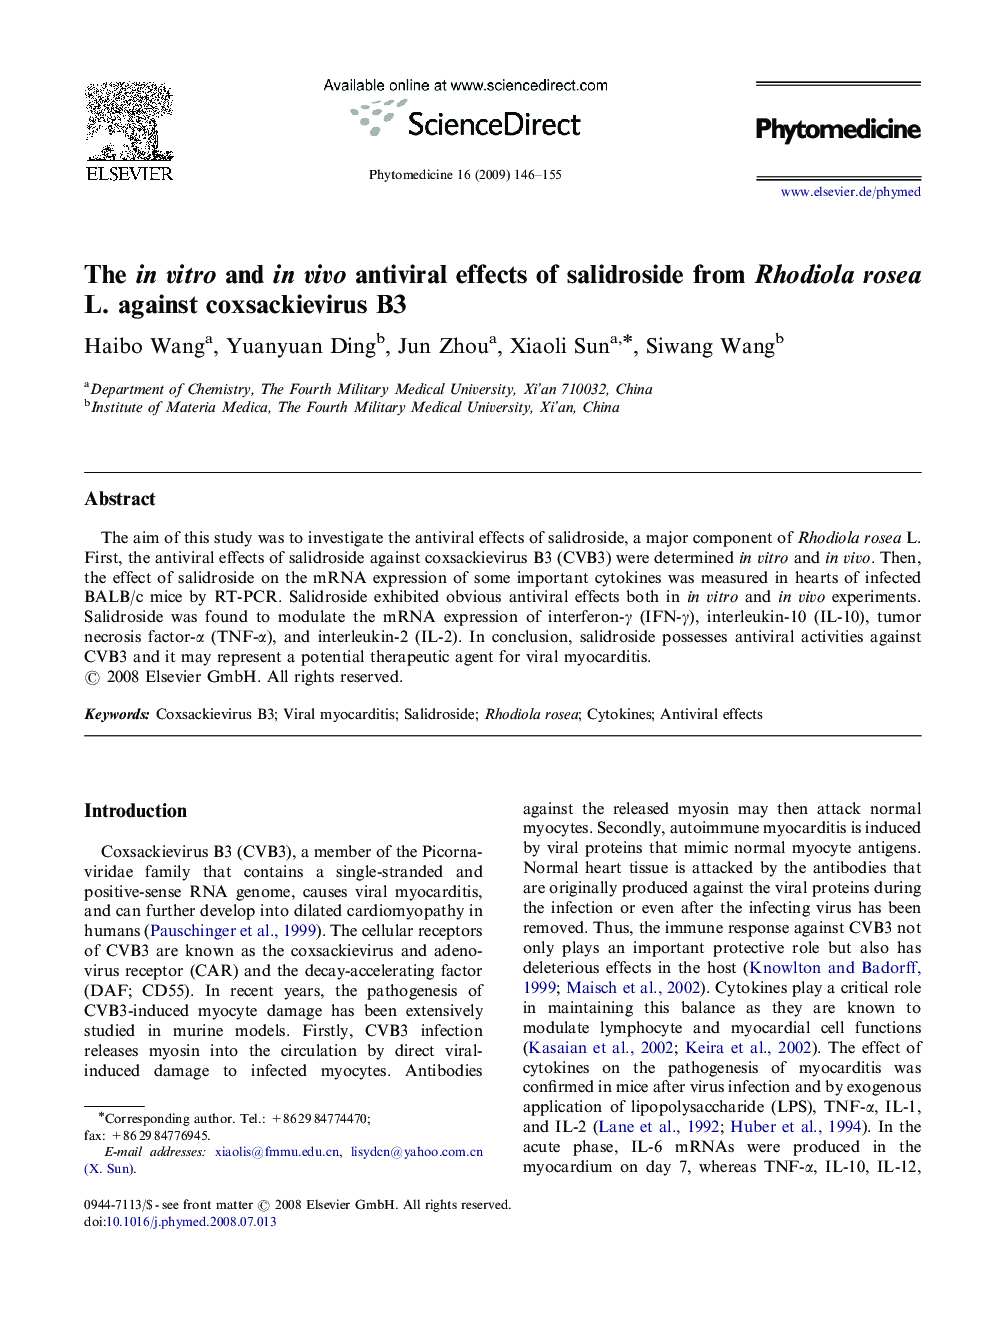 The in vitro and in vivo antiviral effects of salidroside from Rhodiola rosea L. against coxsackievirus B3